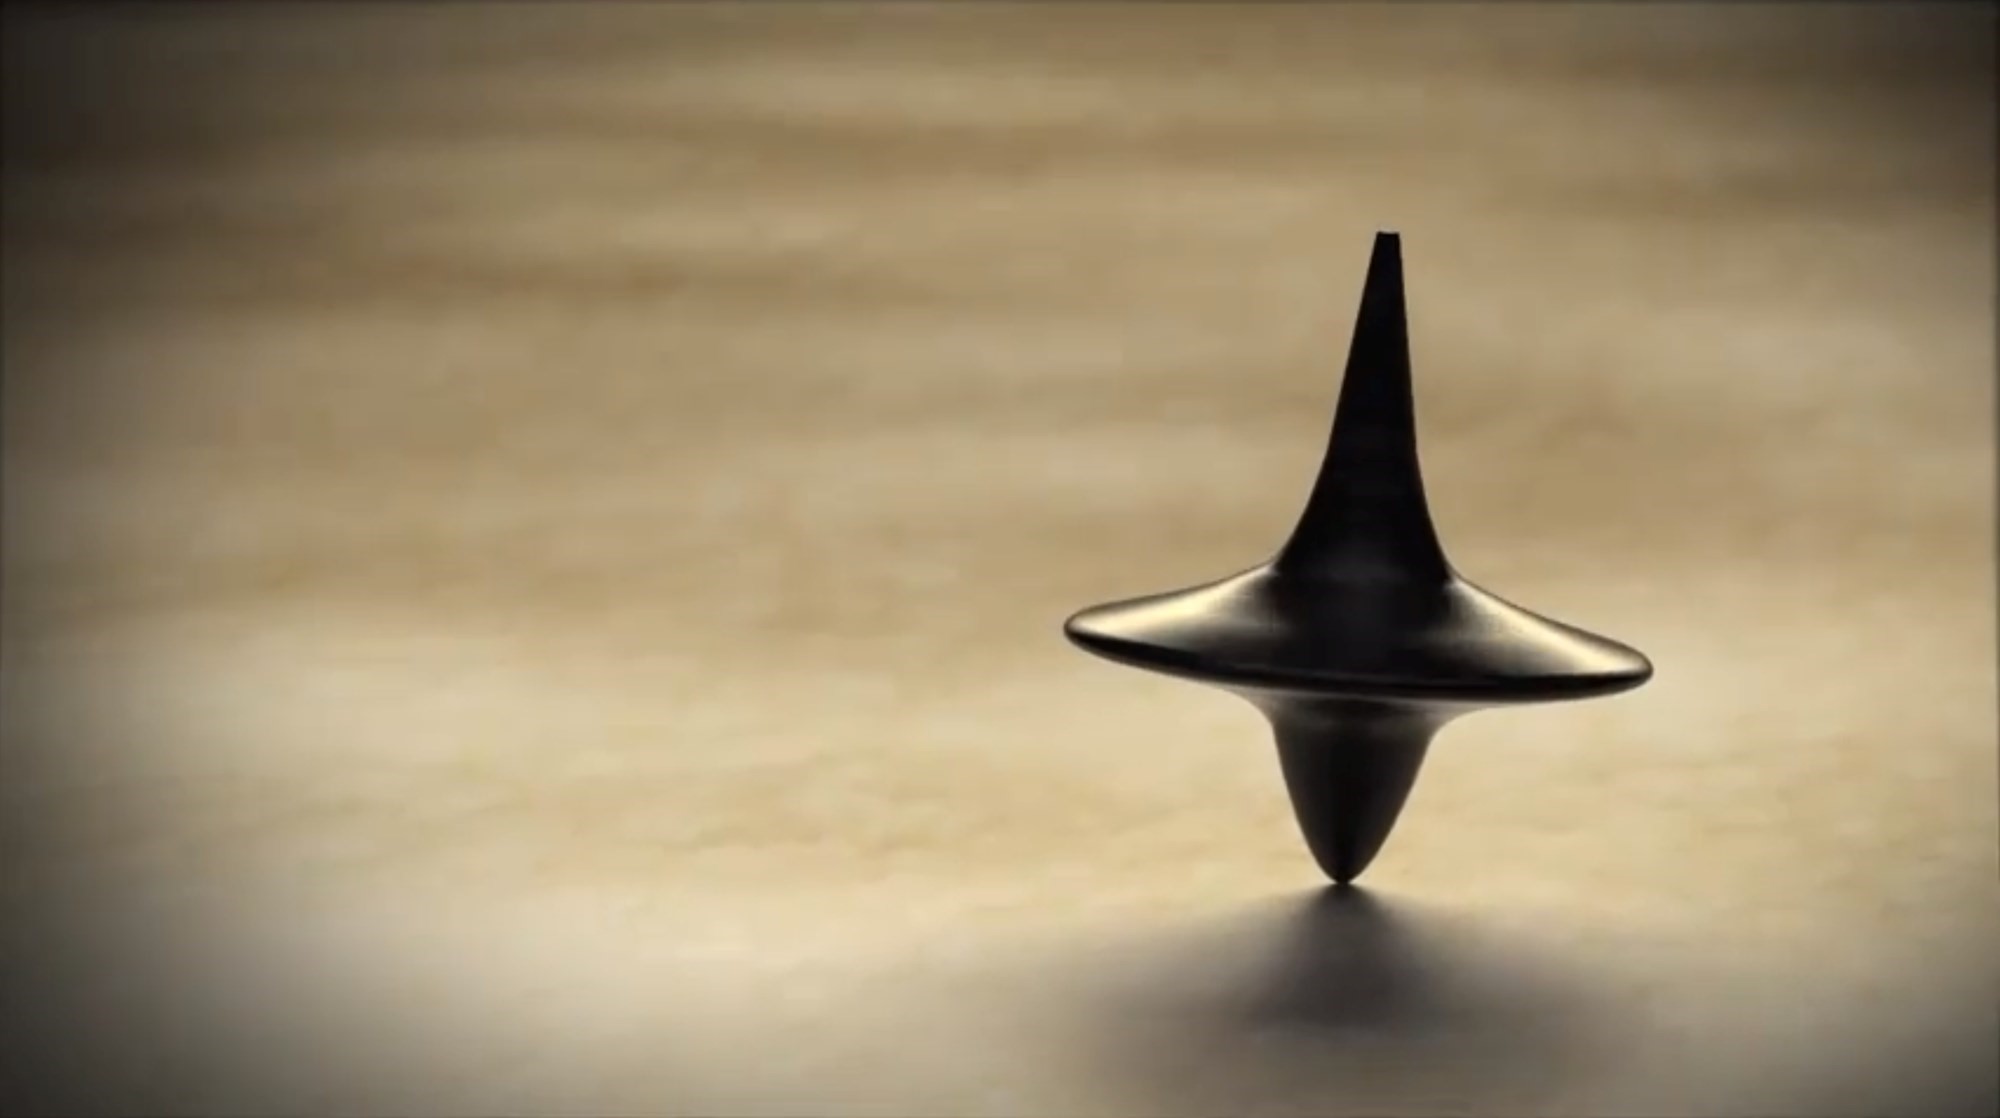 Christopher Nolan explains the spinning top in Inception